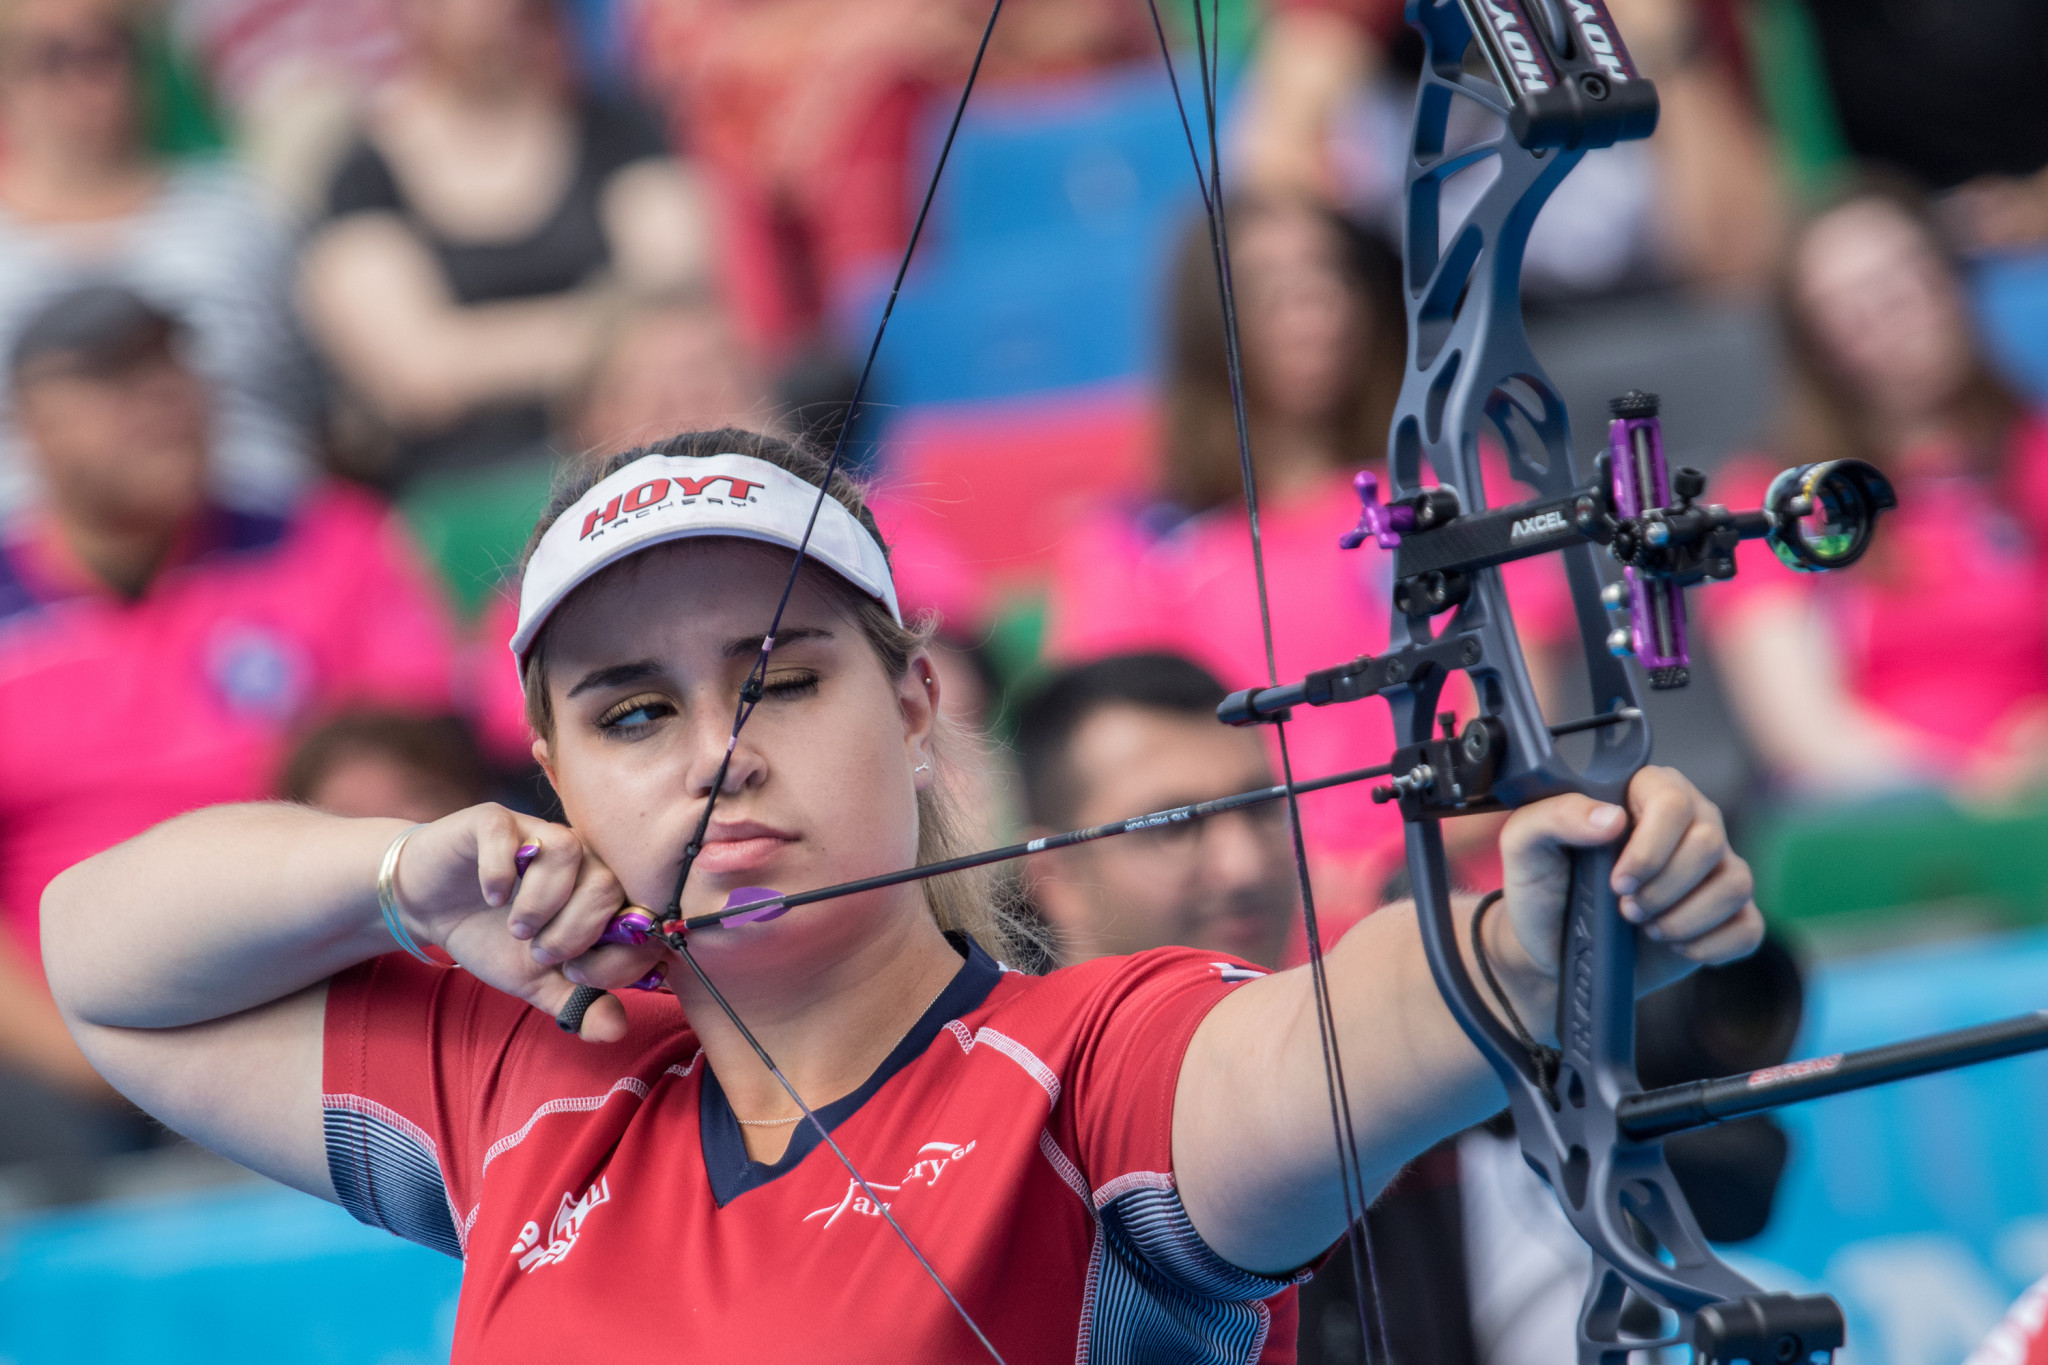 Gibson ends 12-year wait for British Archery World Cup individual winner in Antalya